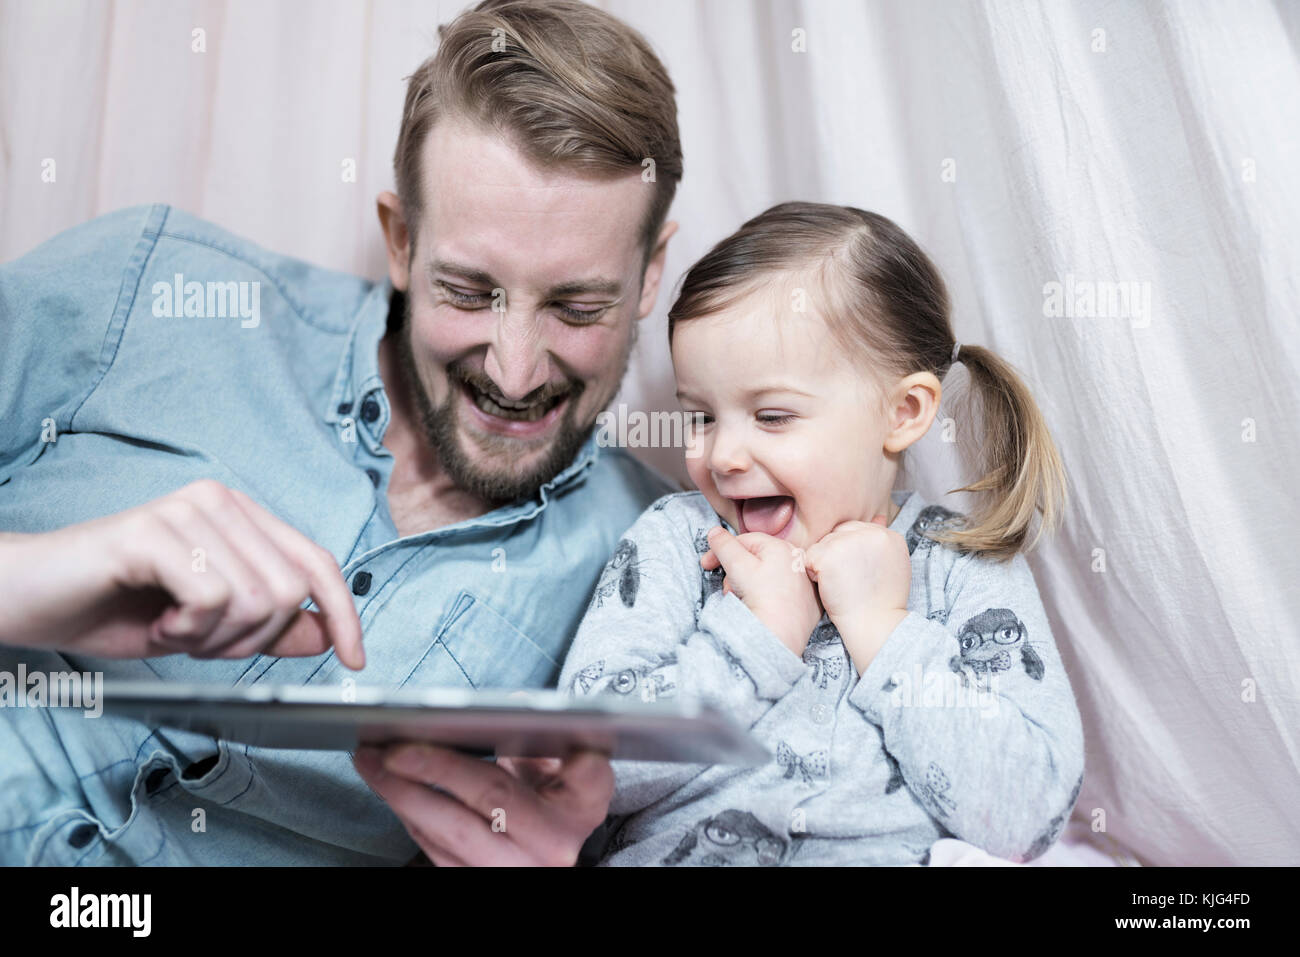 Father and his toddler daughter looking at tablet and laughing together Stock Photo